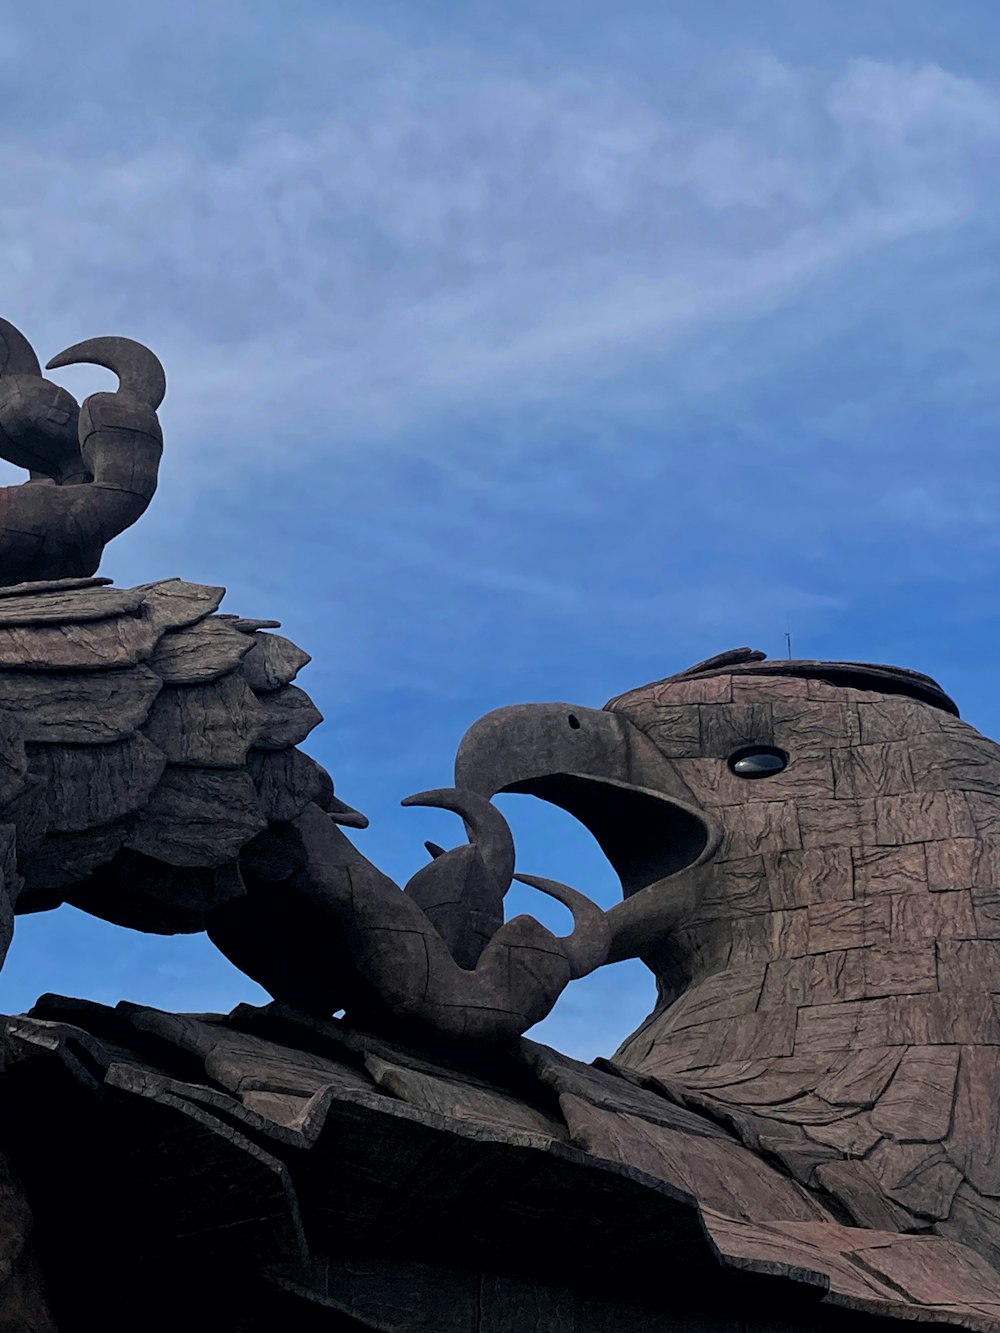 a statue of an elephant and a bird on top of a building